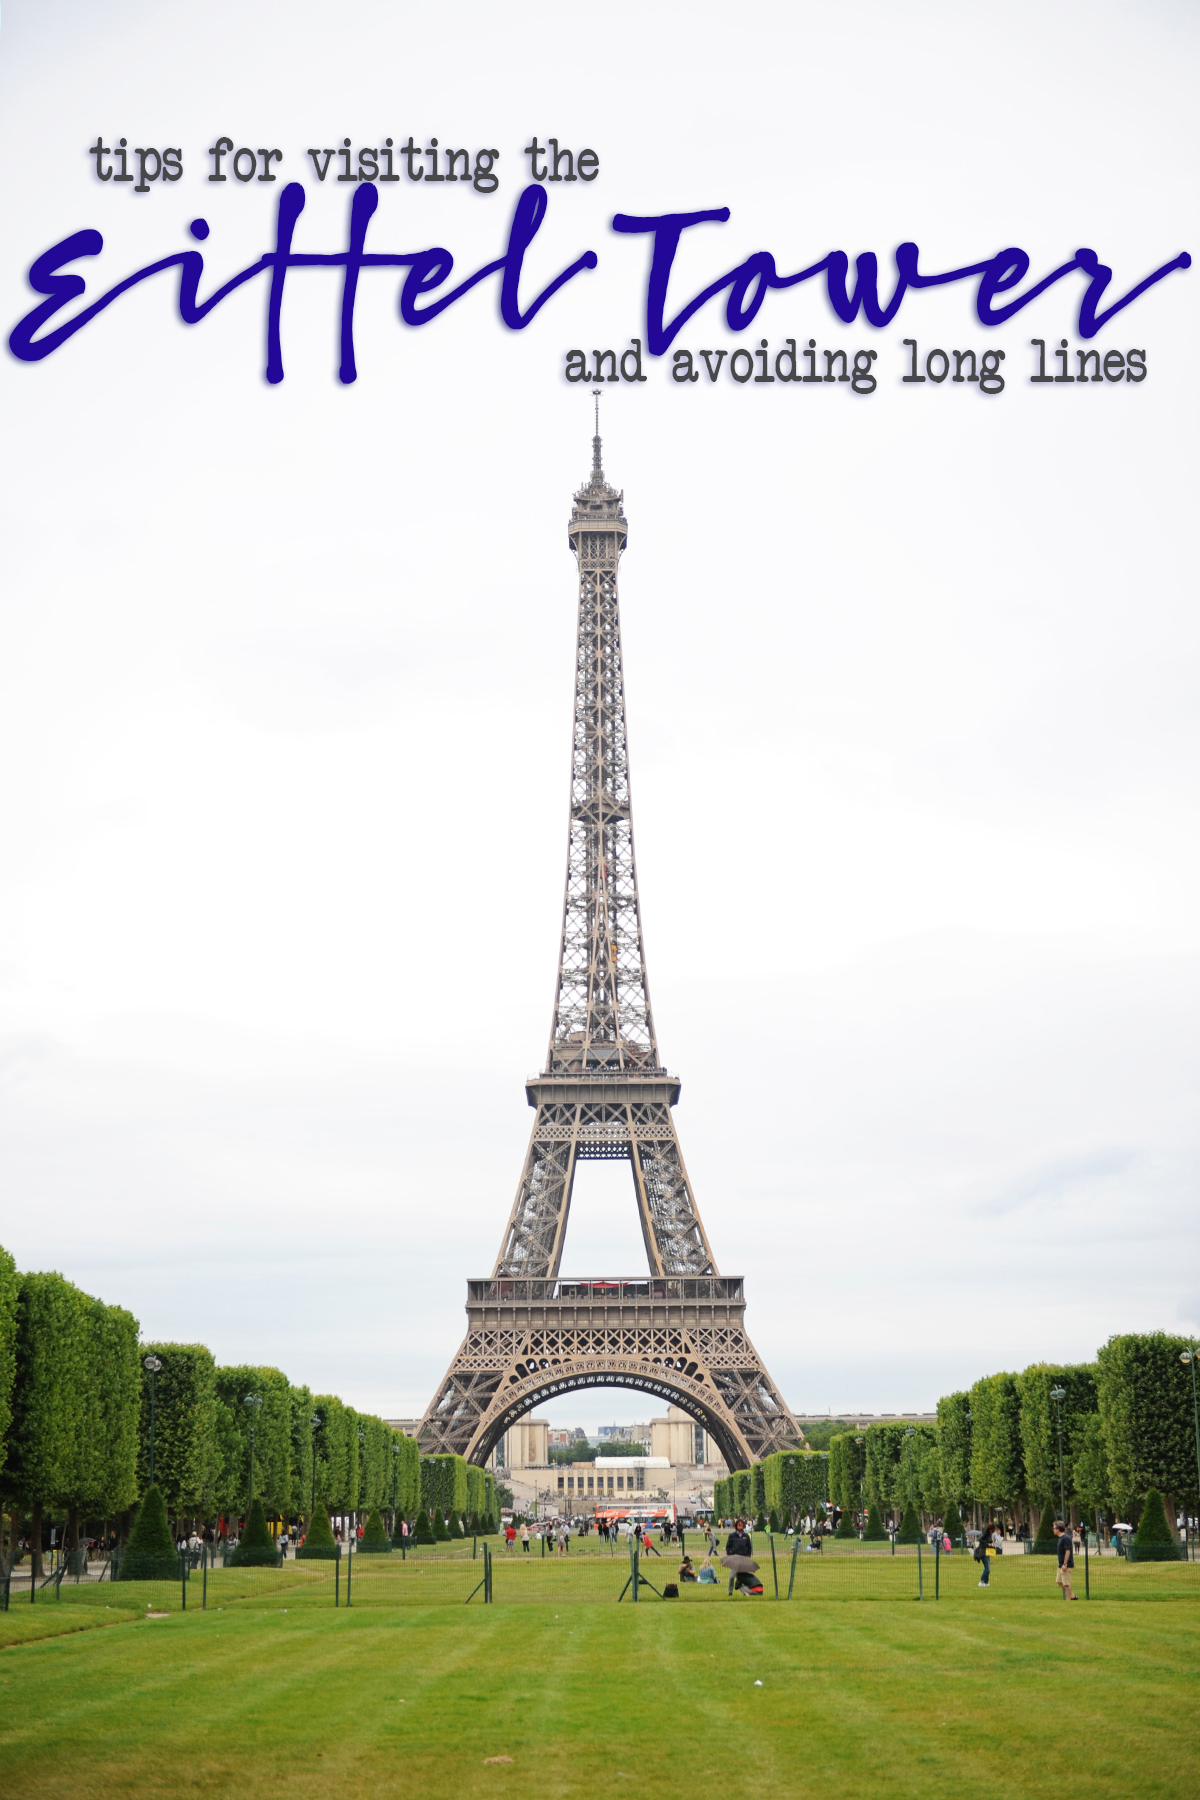 Eiffel Tower Tickets and Tips for Visiting the Eiffel Tower - Pink ...